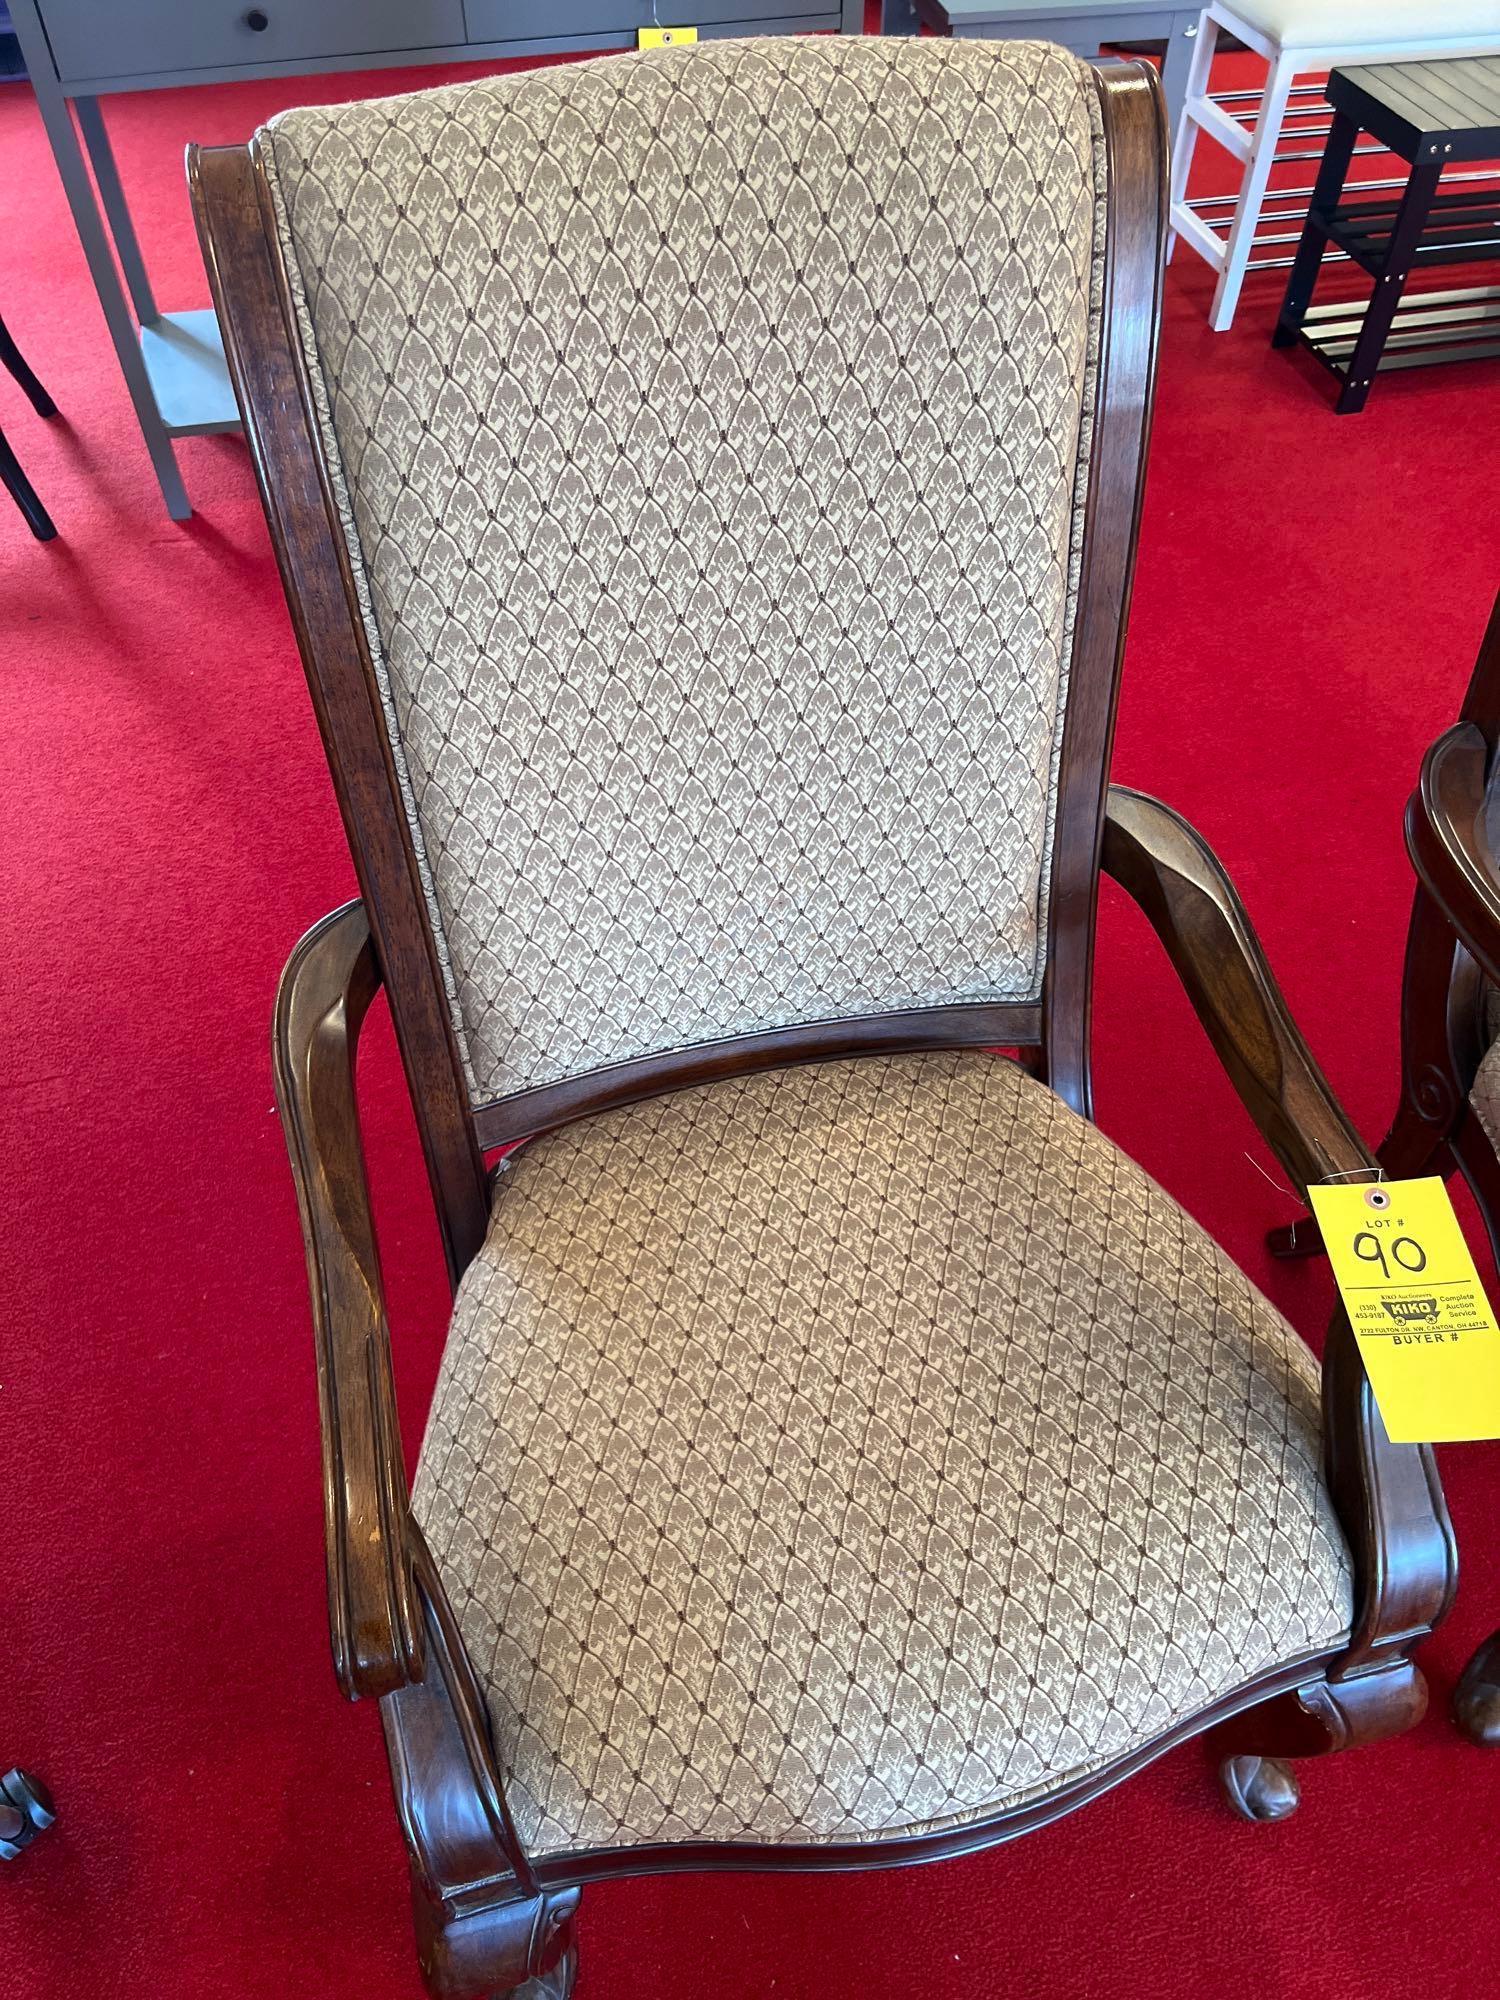 (2) Matching Upholstered Chairs